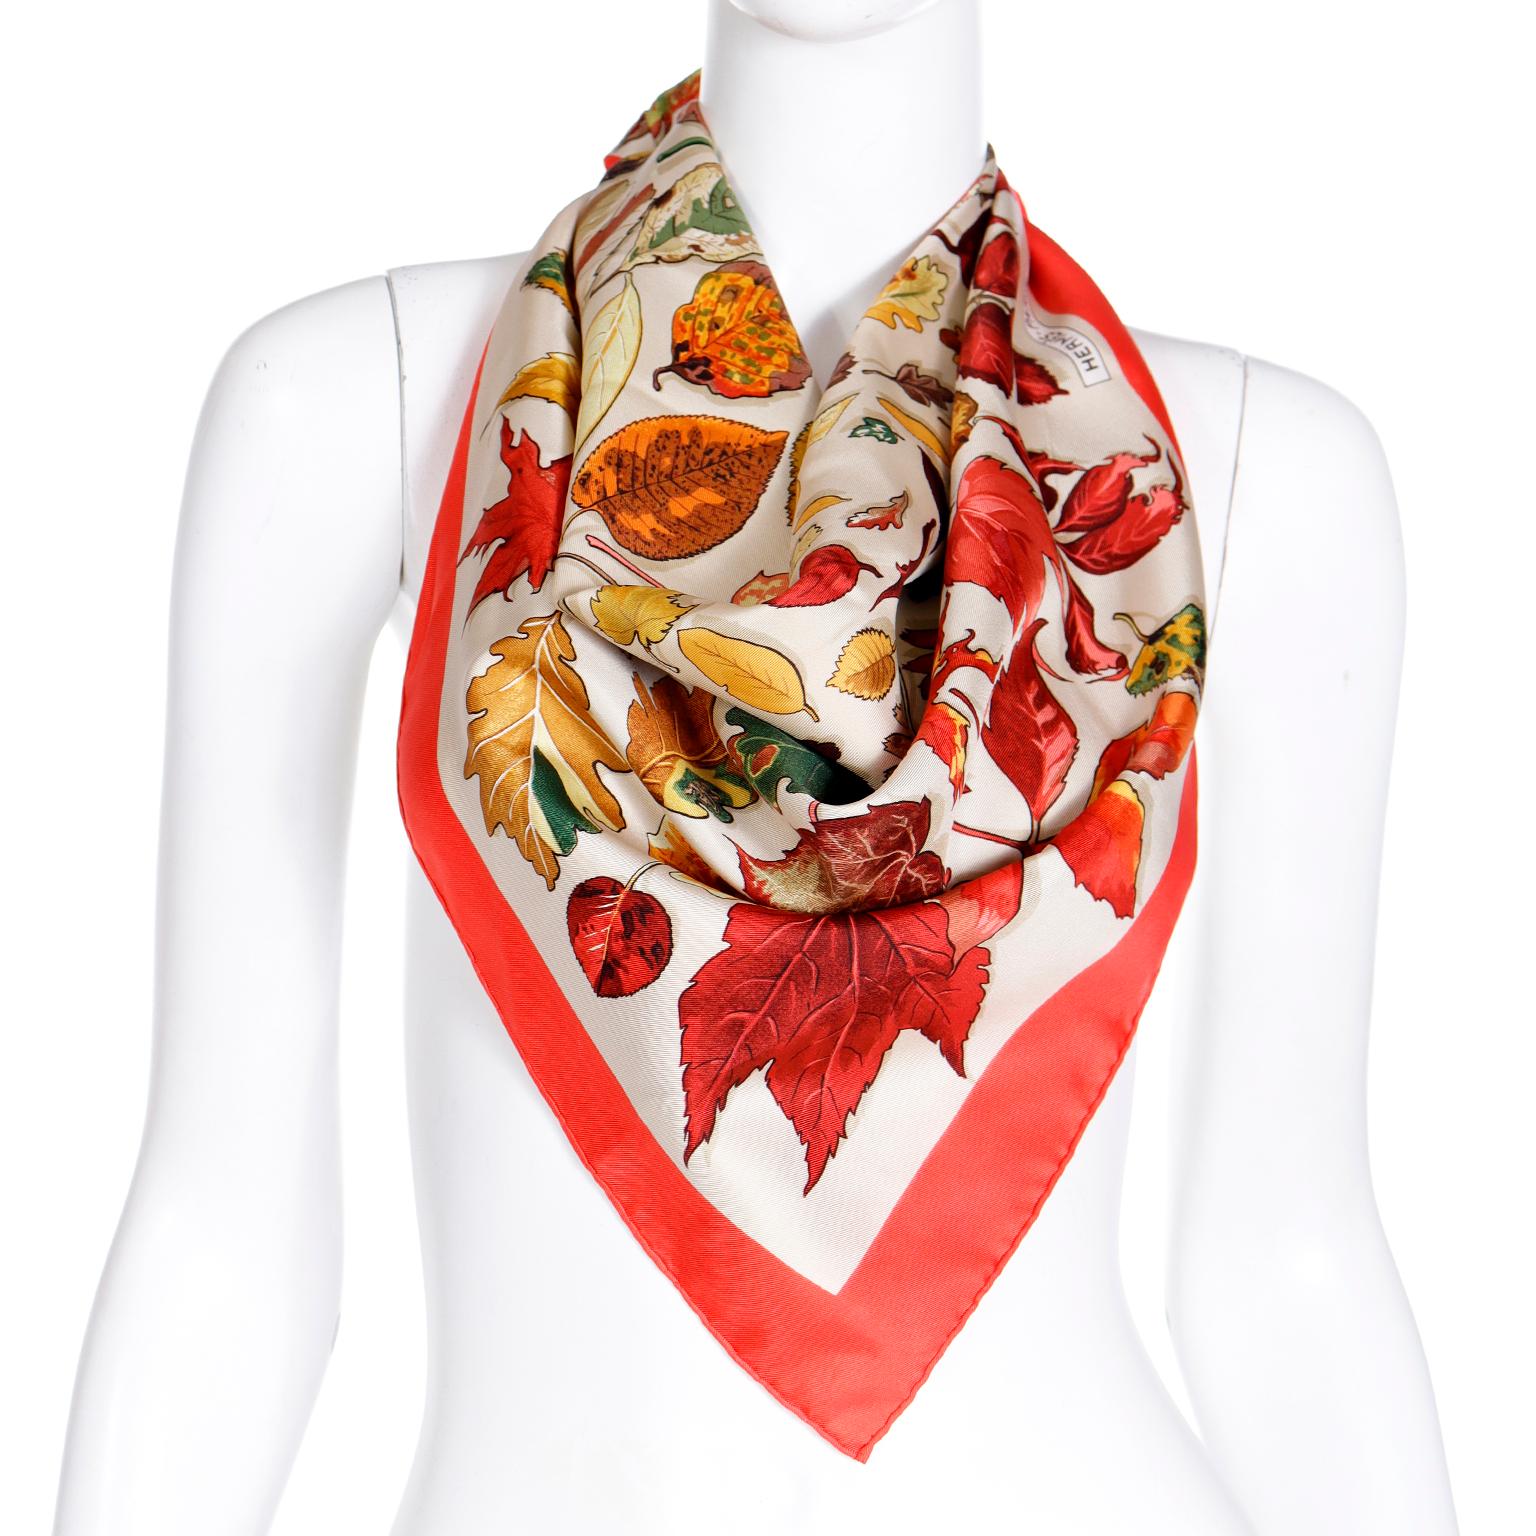 This beautiful vintage Hermès Tourbillons 100% silk scarf was designed by Christiane Vauzelles in 1968. This particular colorway is from the 1990's. The scarf has a red border and the soft cream background provides nice contrasting backdrop for the